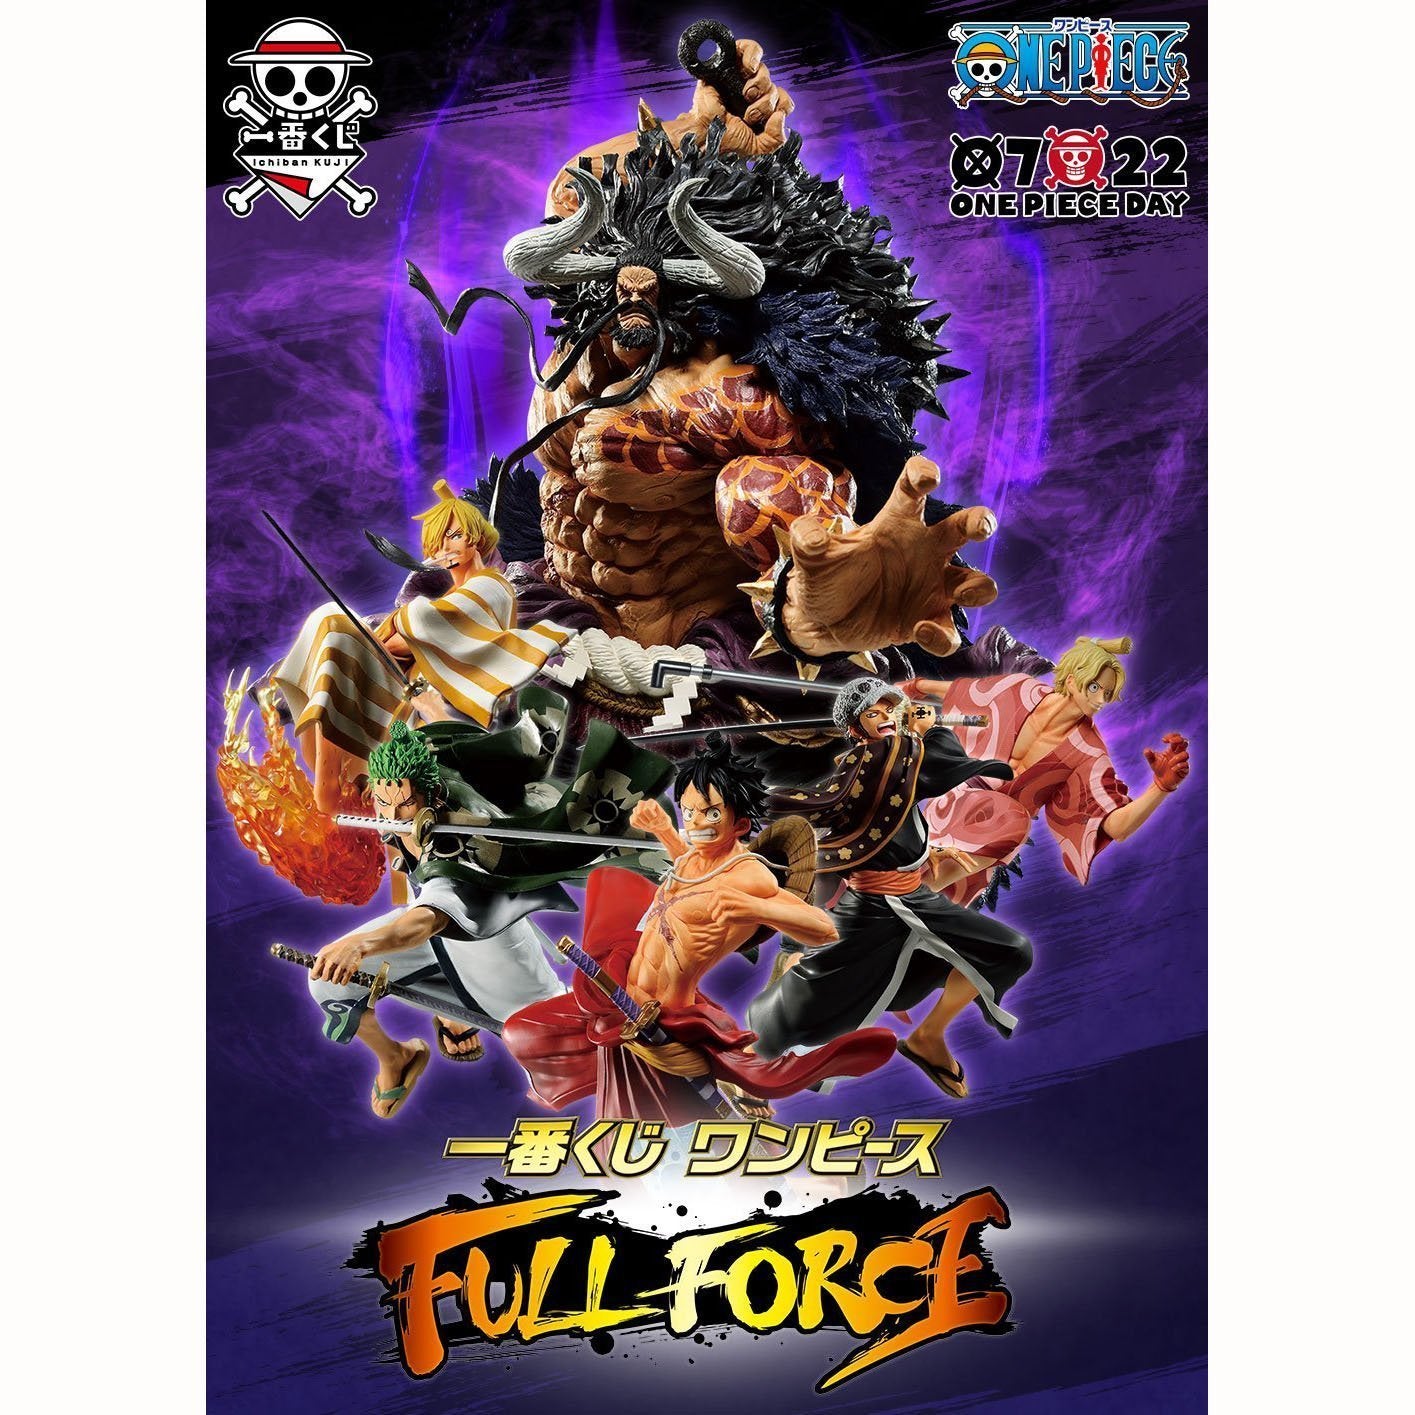 [Modified] (Change SP Prize with Last Prize) Ichiban Kuji One Piece "Full Force"-Bandai-Ace Cards & Collectibles